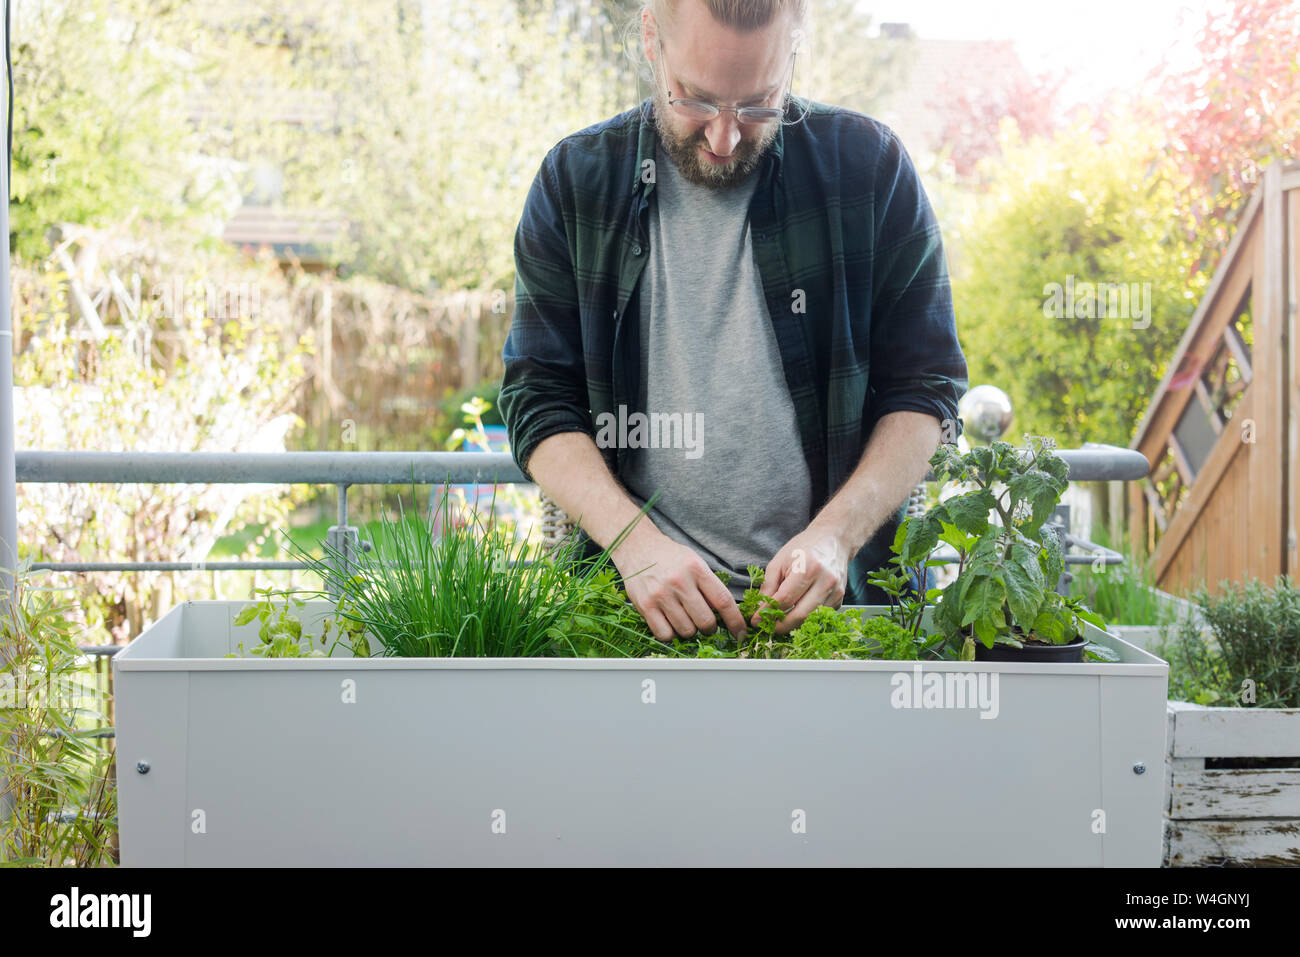 Man caring for herbary in raised bed Stock Photo